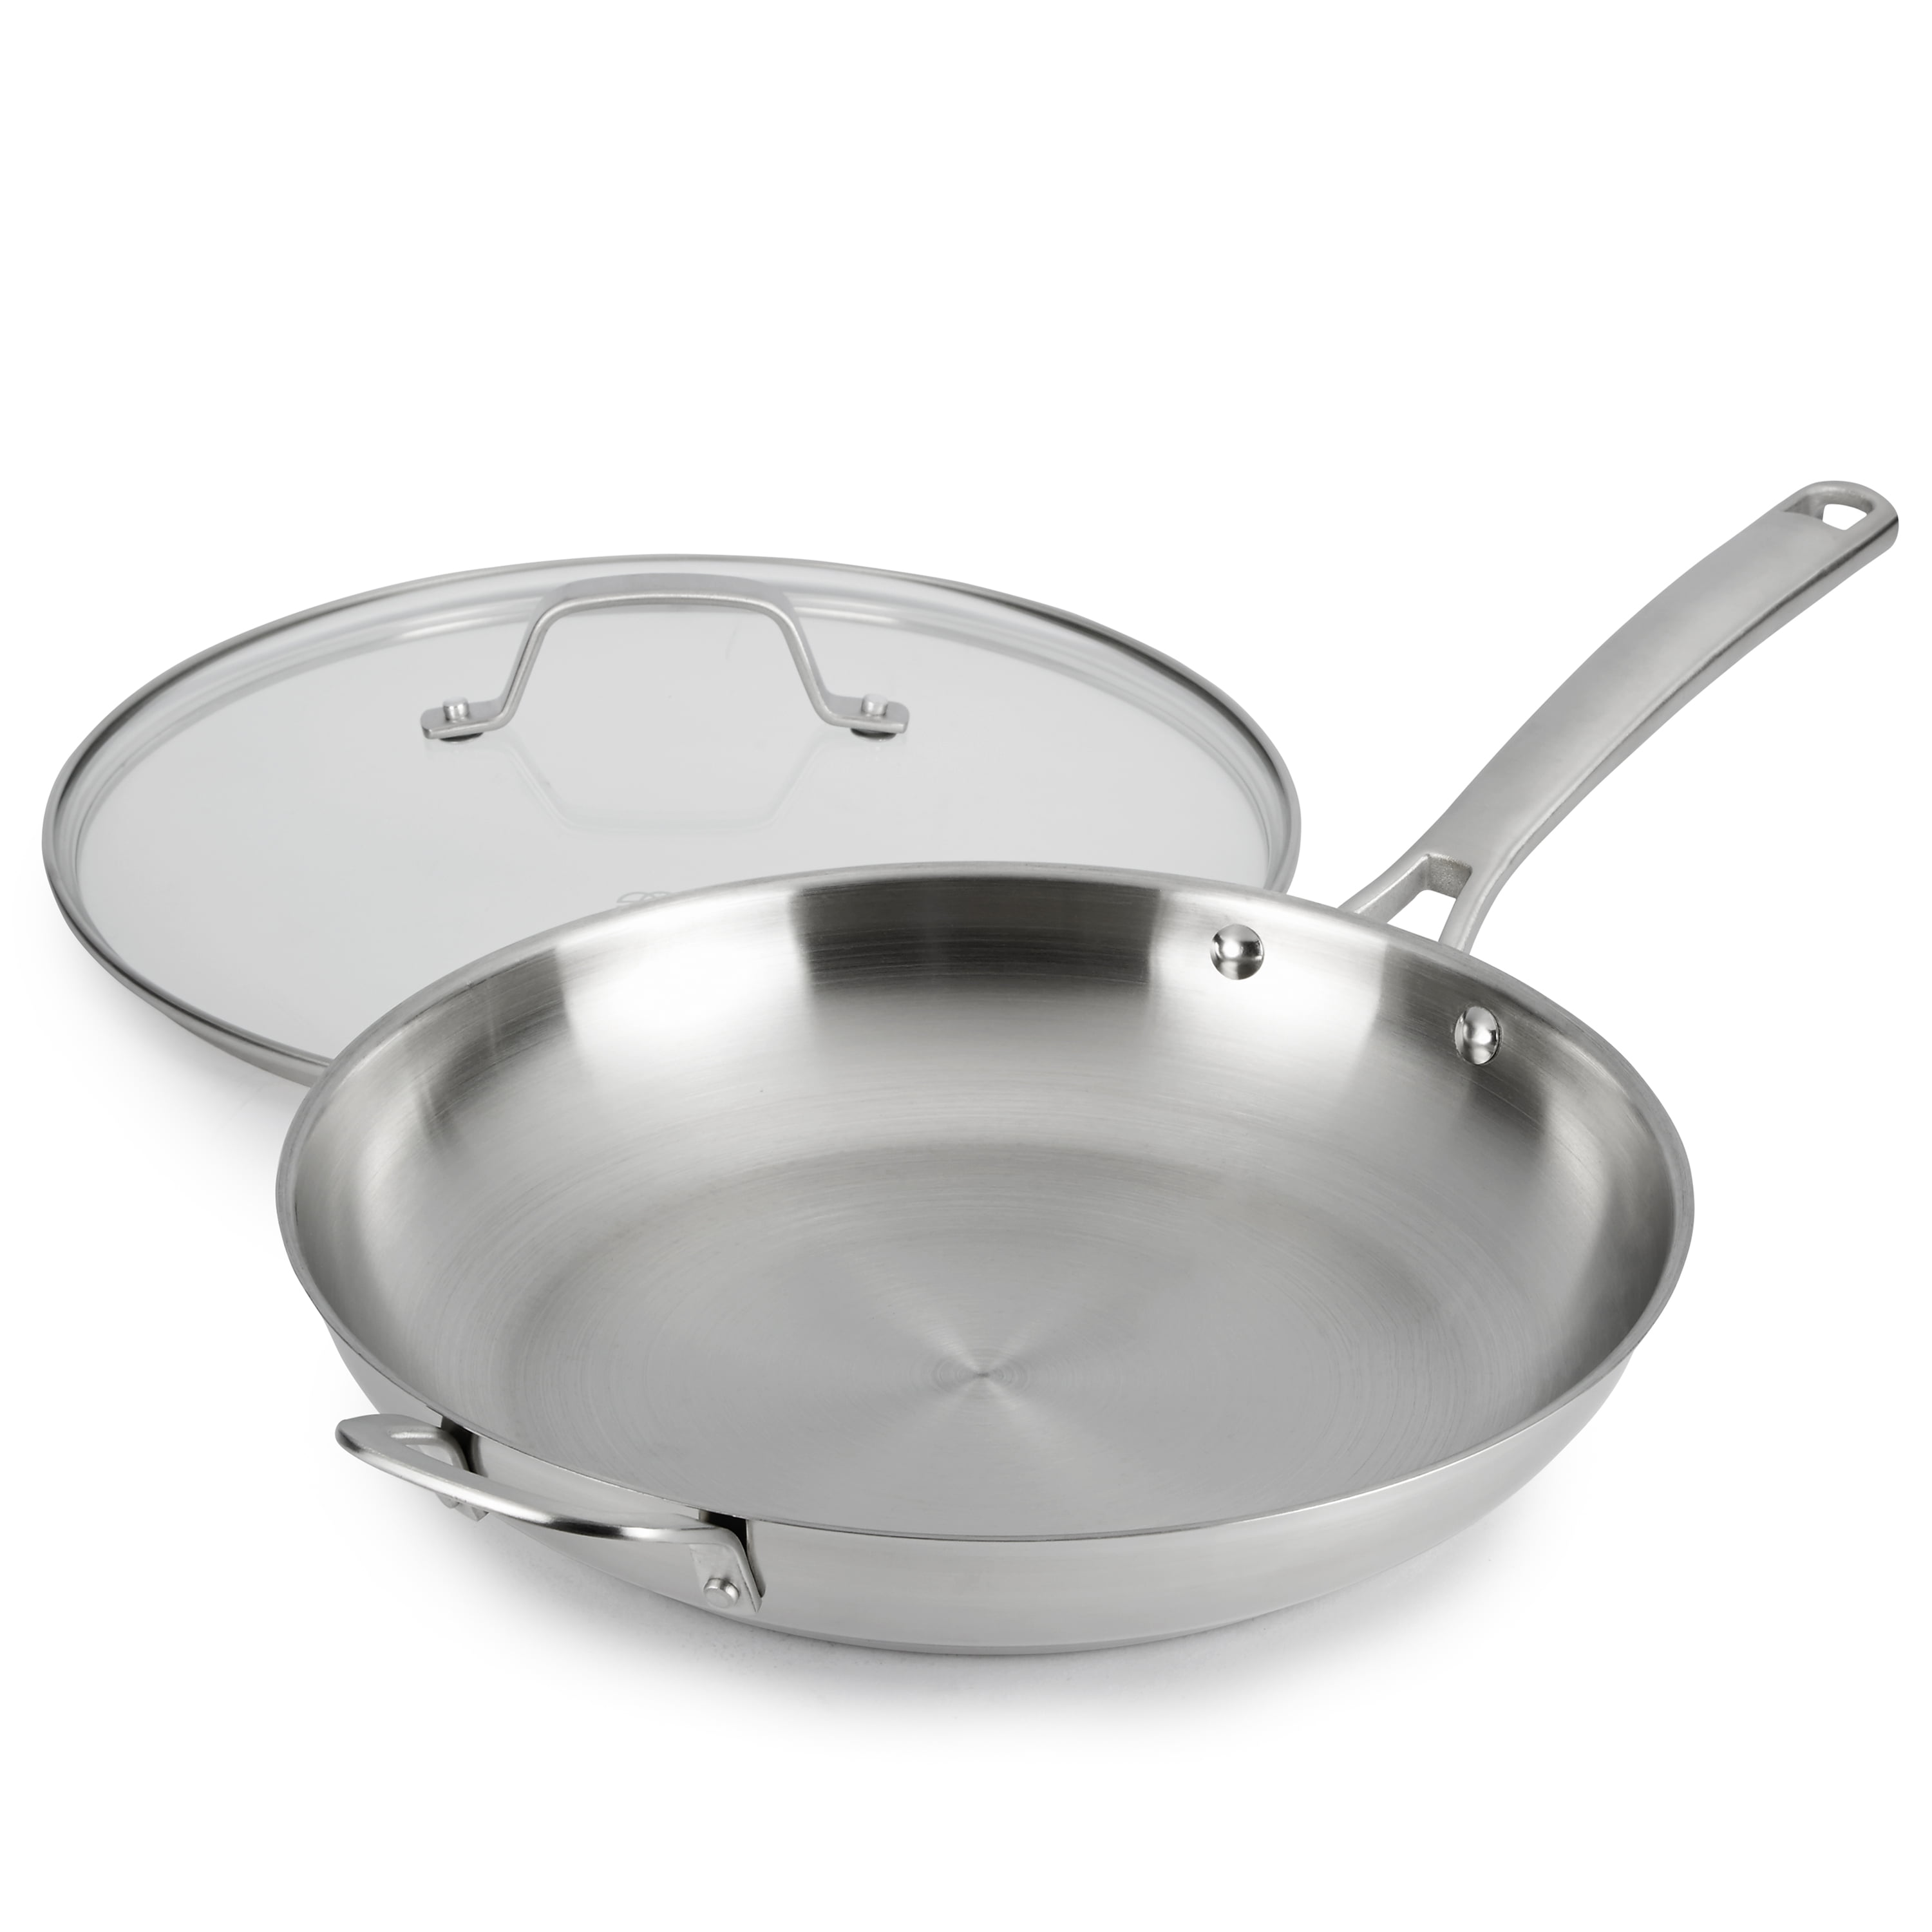 Calphalon 12 Inch Pan Stainless Steel